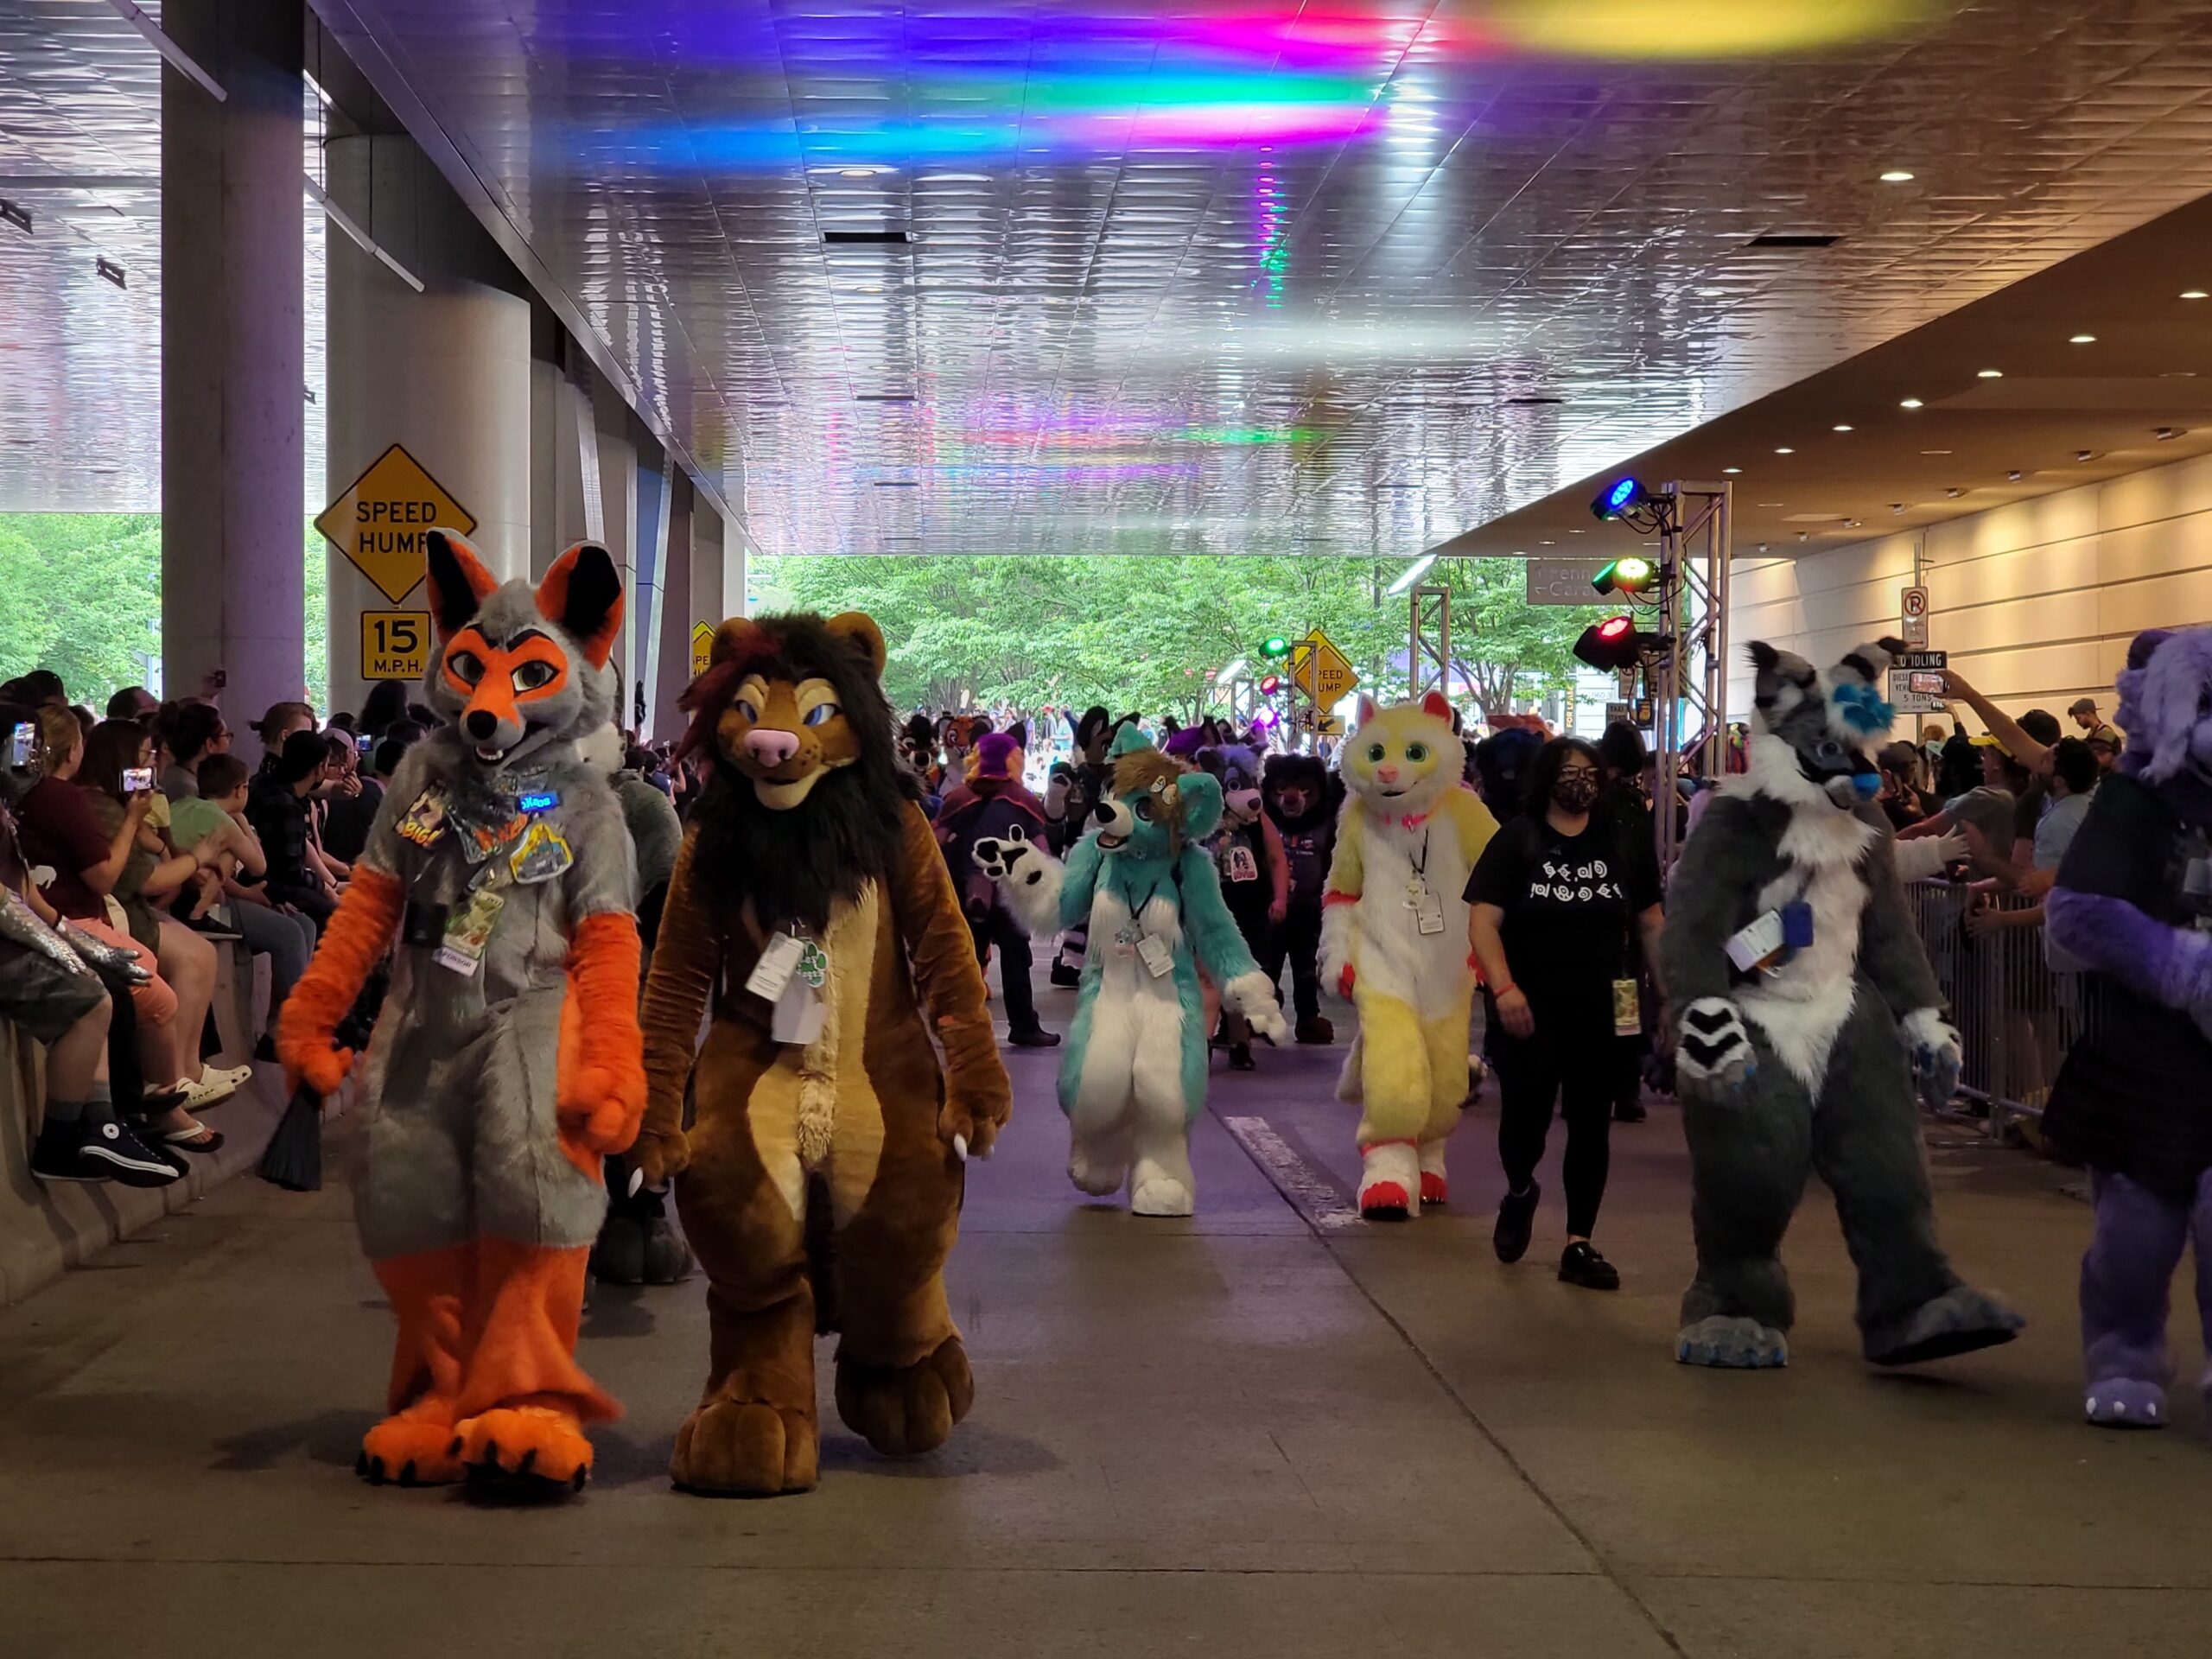 Missed out on a hotel room for Anthrocon? VisitPITTSBURGH has you